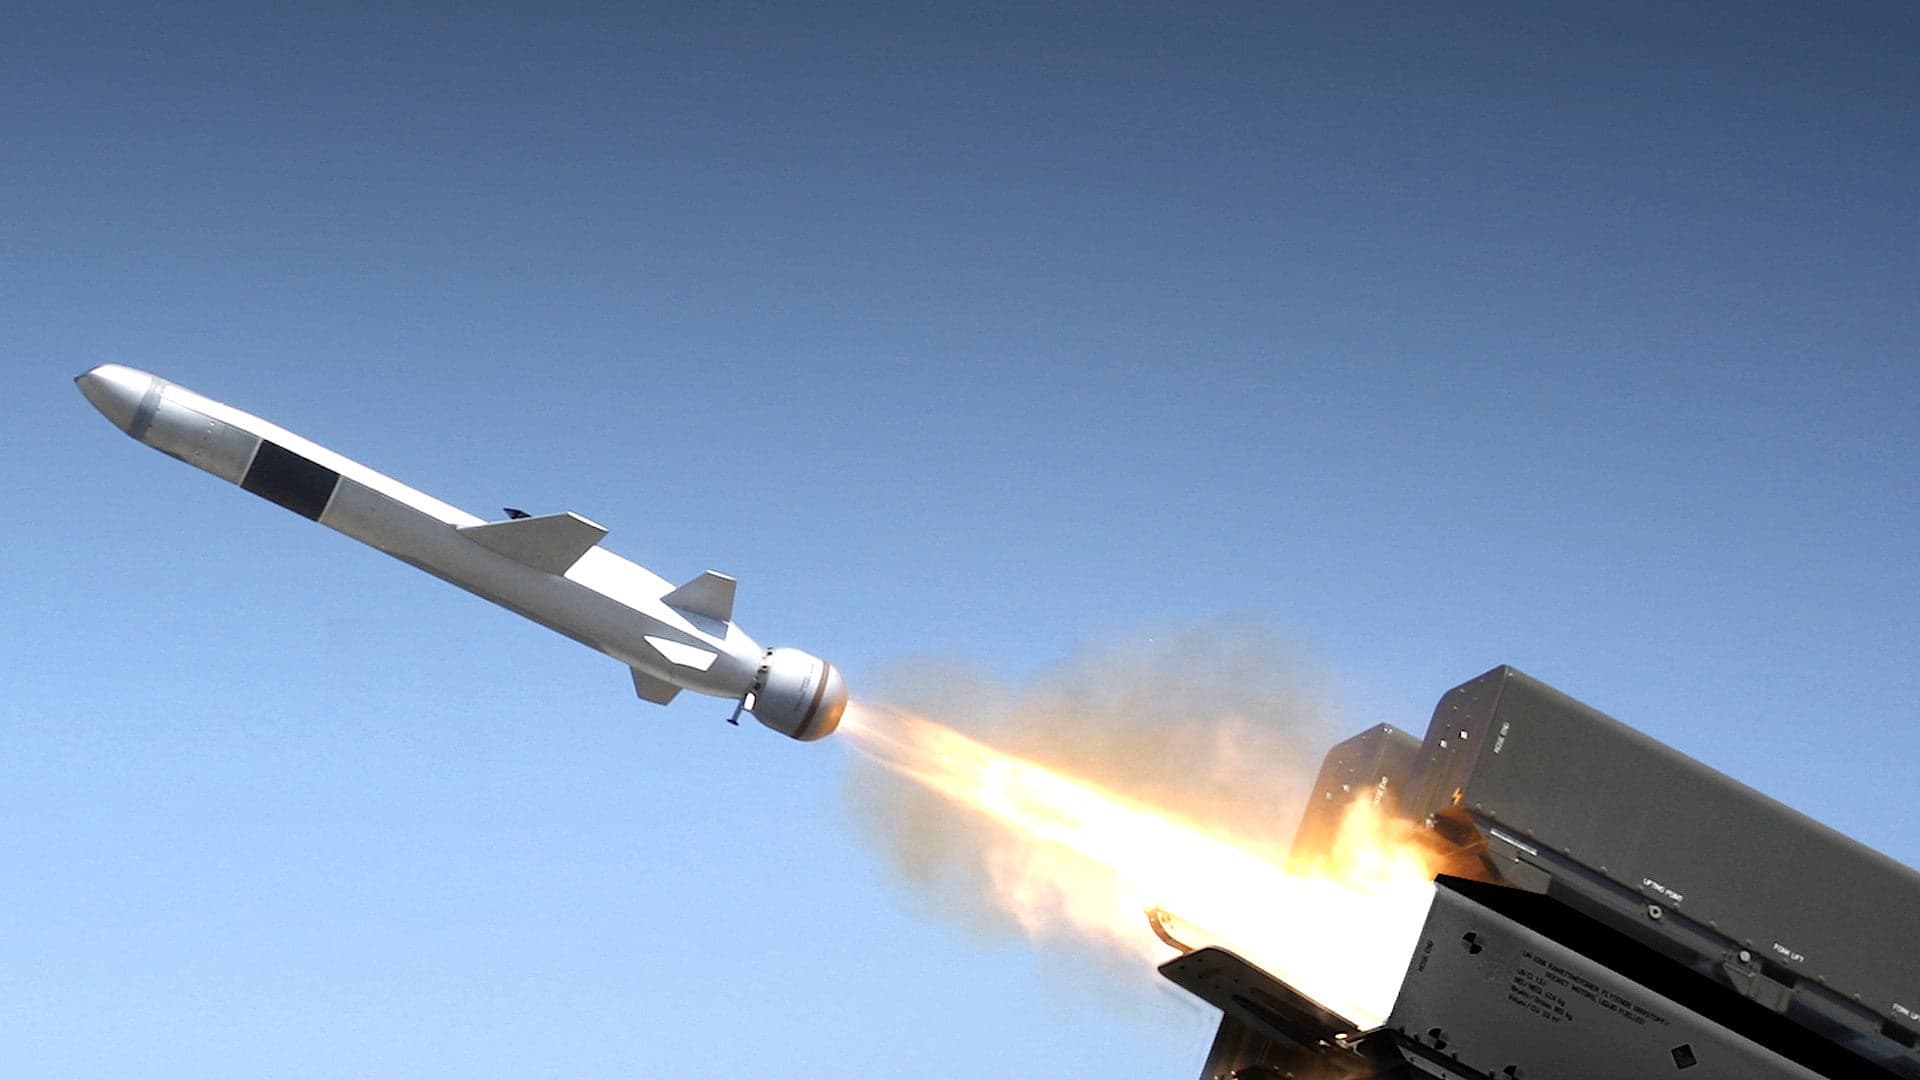 Marine Corps Reveals It Has Tested A New Anti-Ship Missile Launcher Truck